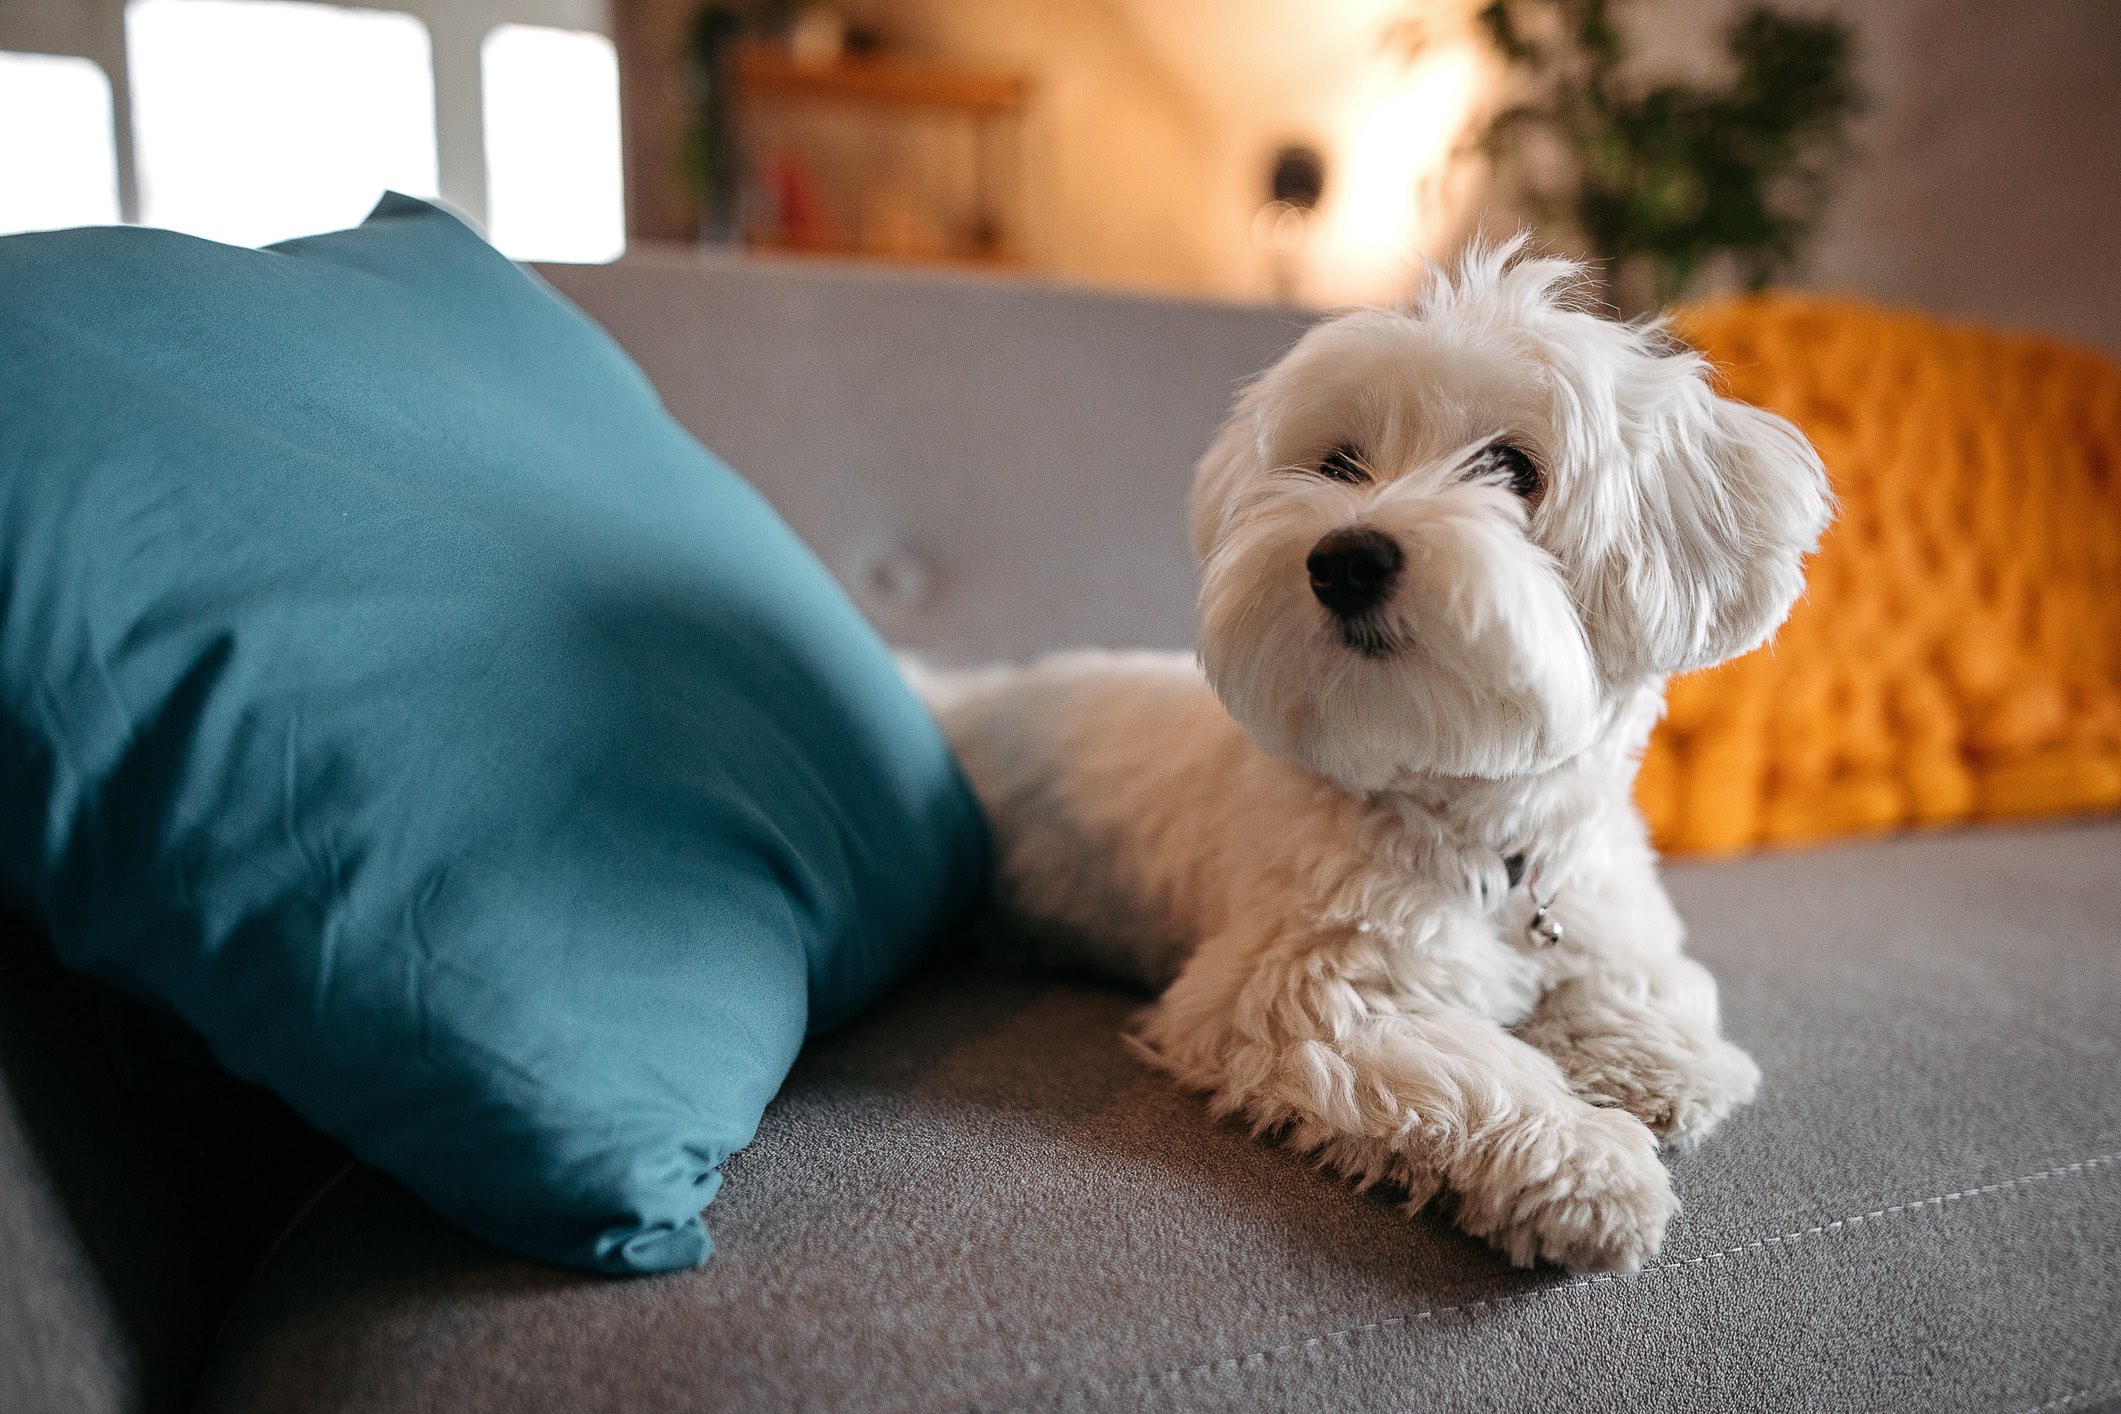 white maltese dog with a puppy haircut lying on a couch